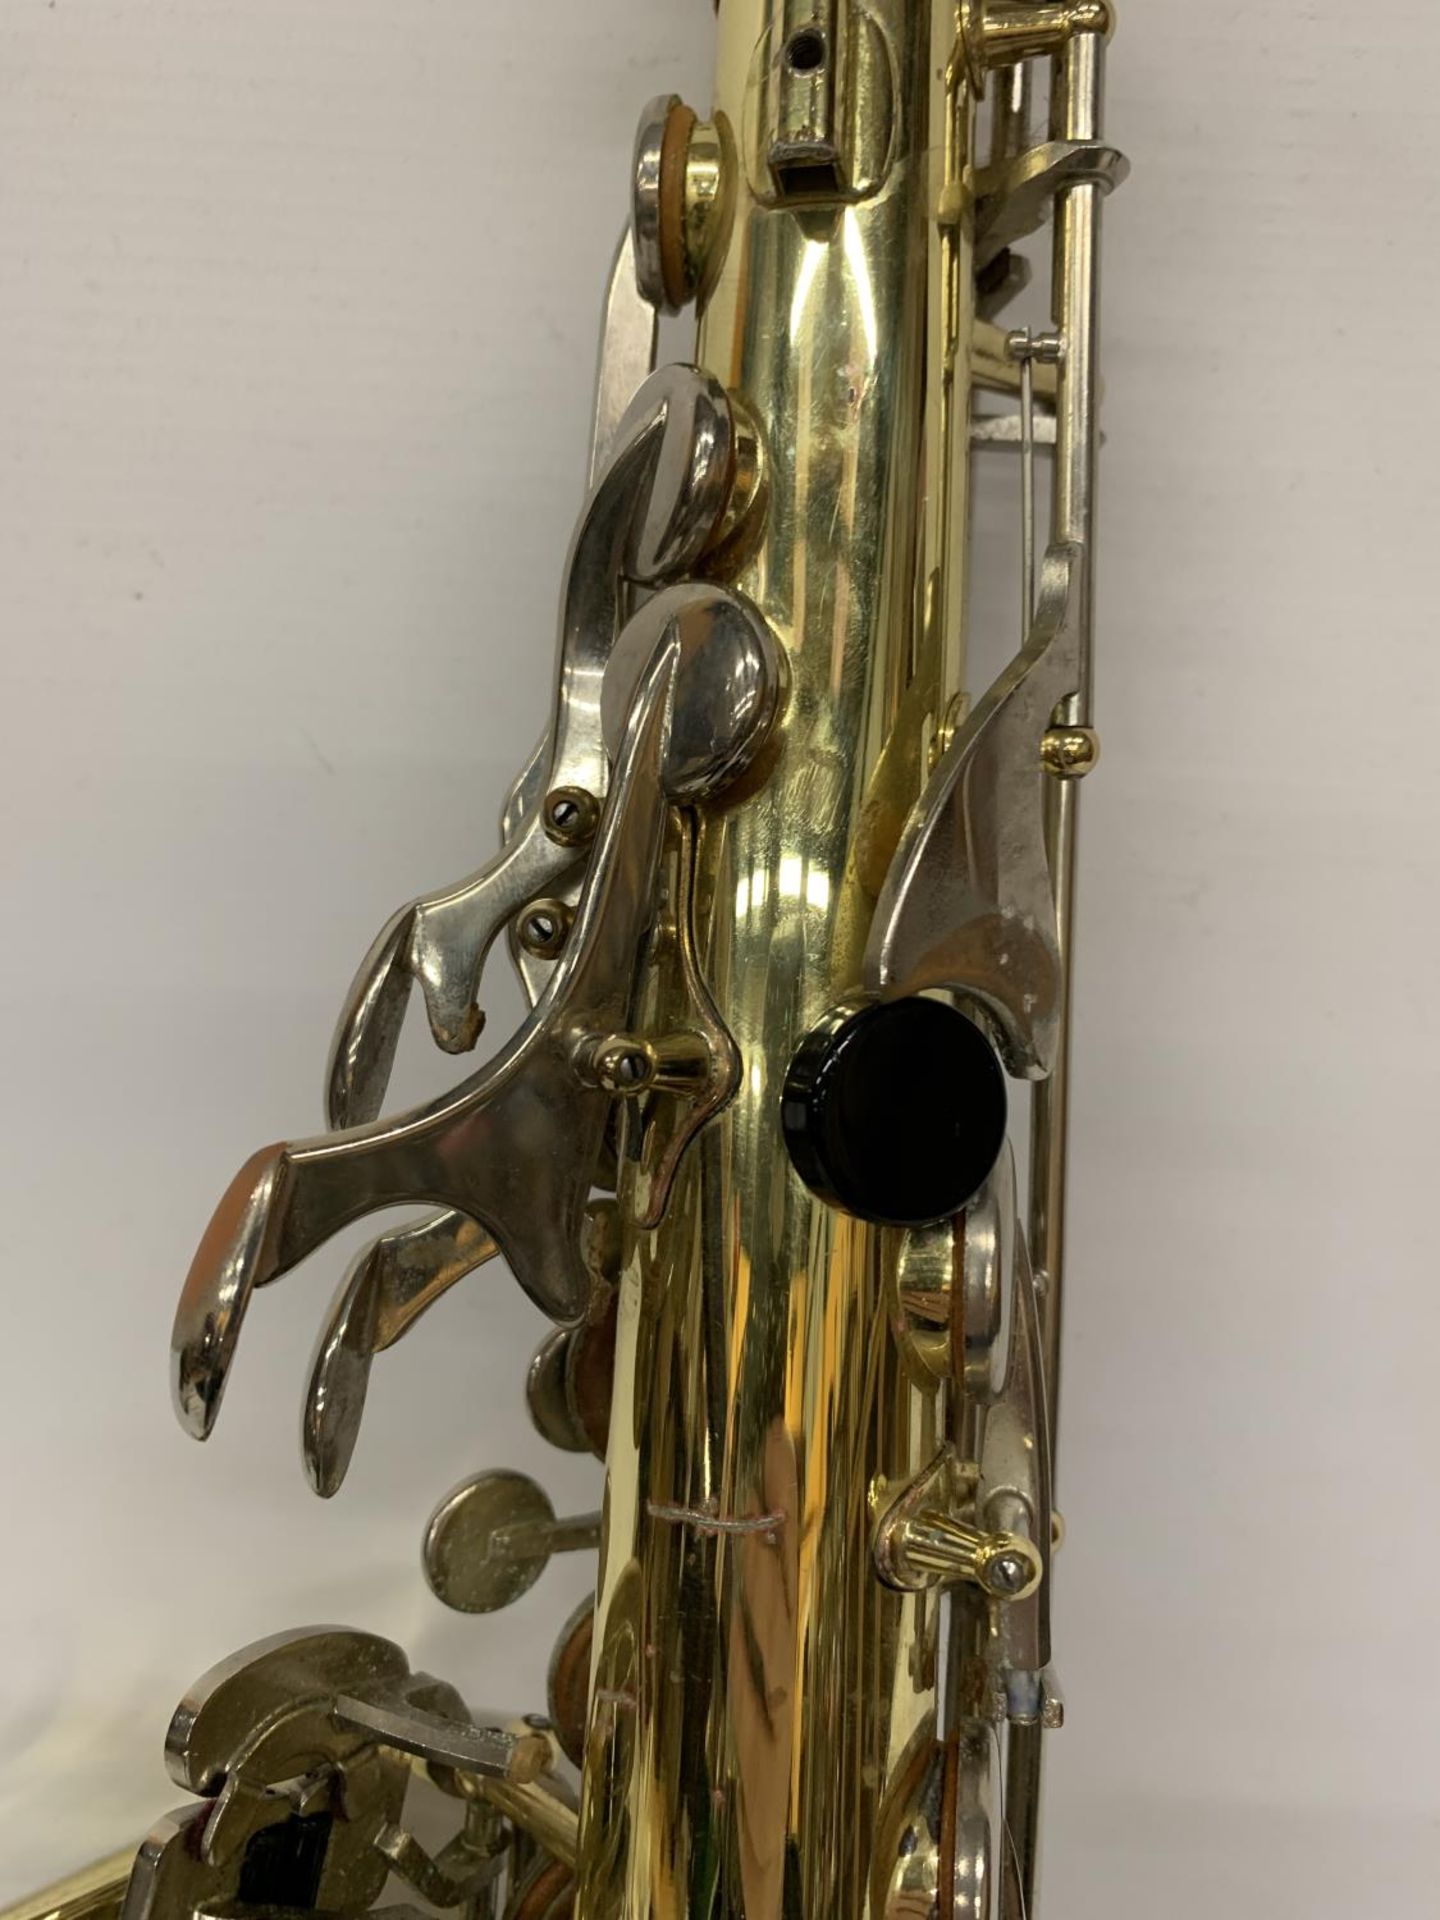 A YAMAHA SAXOPHONE WITH CASE AND A TEACHING BOOK - Image 15 of 24